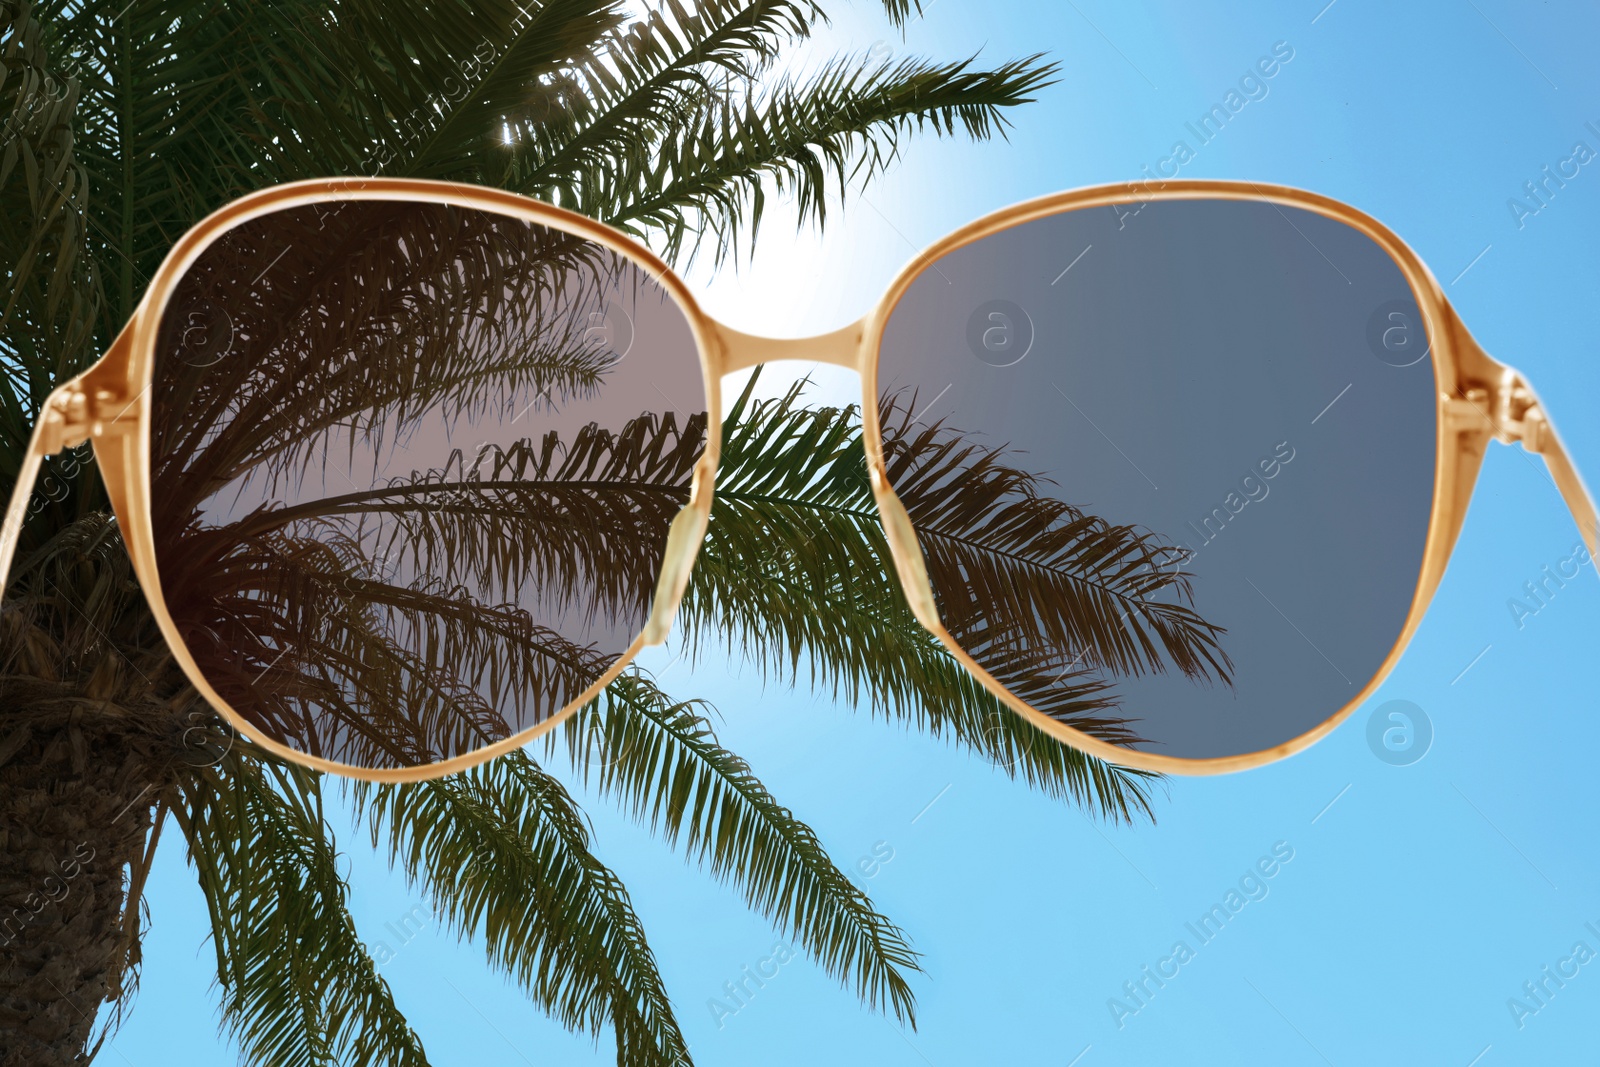 Image of Palm with lush green foliage on sunny day, view through sunglasses